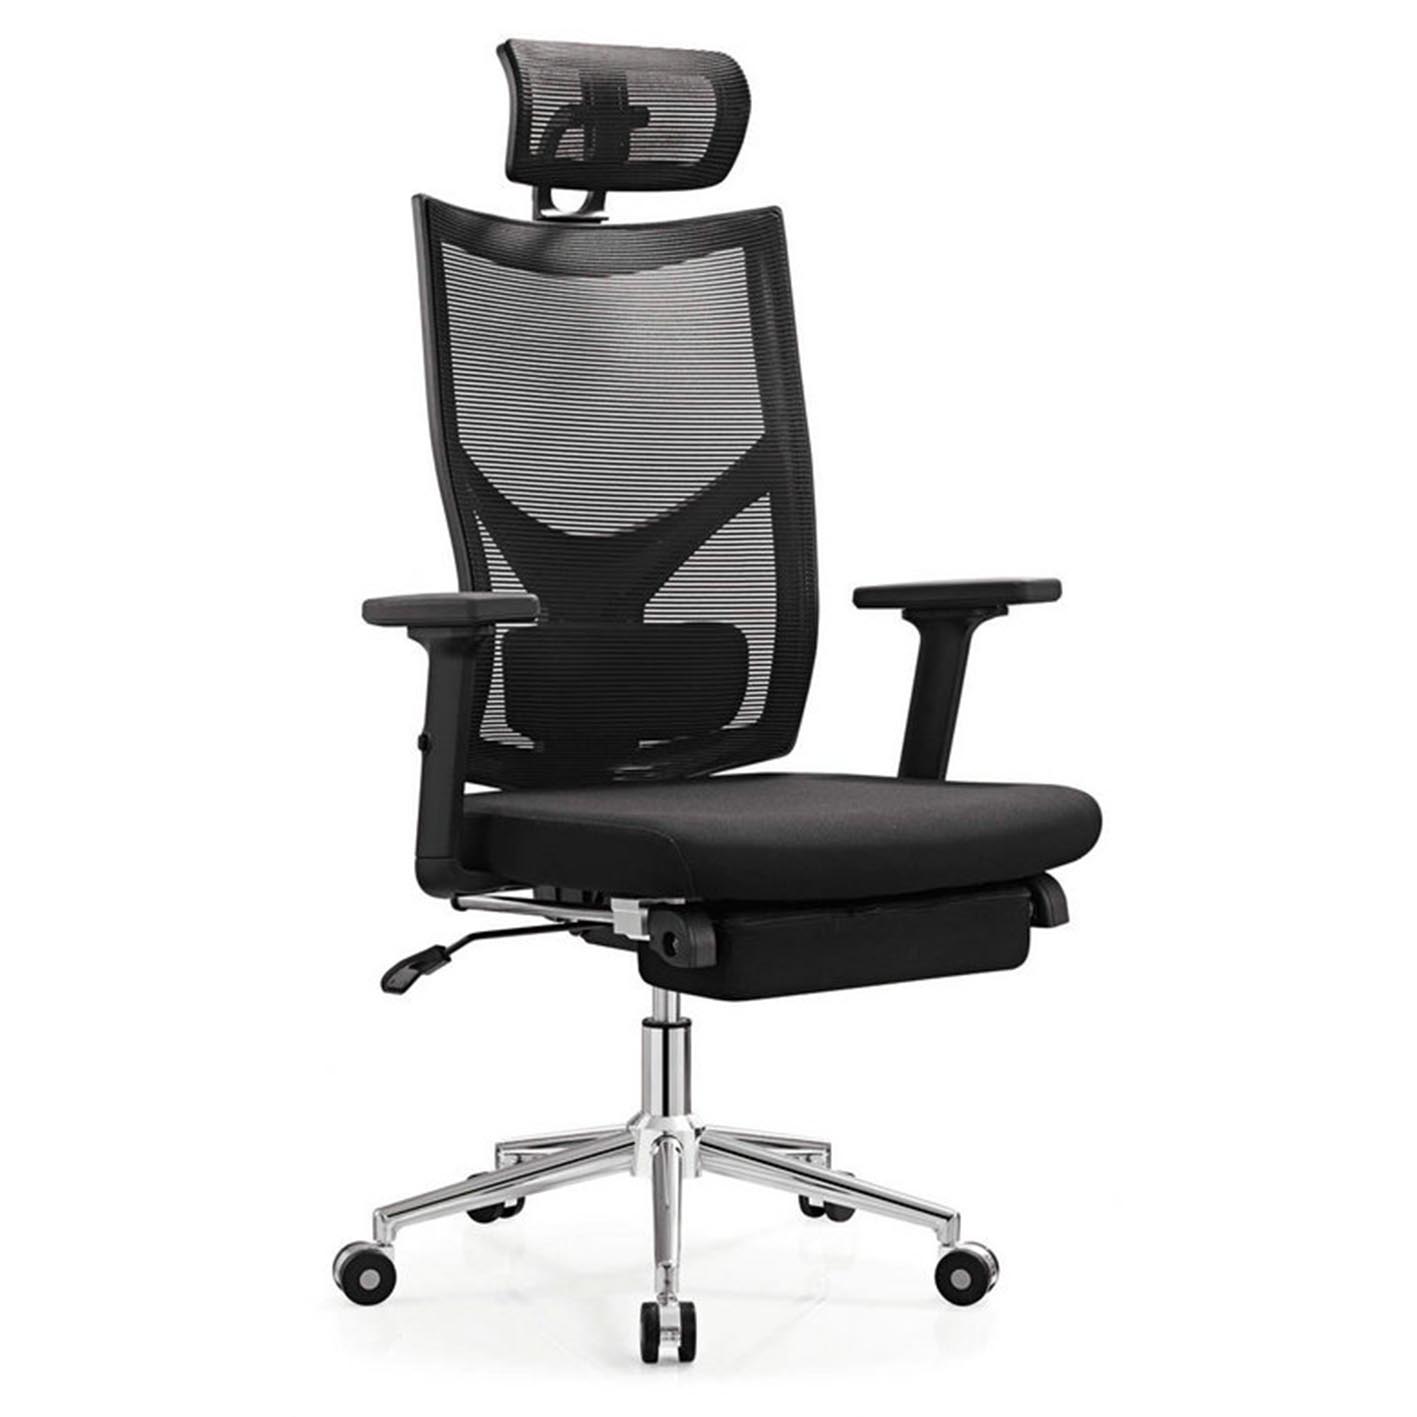 modern office chair that reclines with footrest and headrest